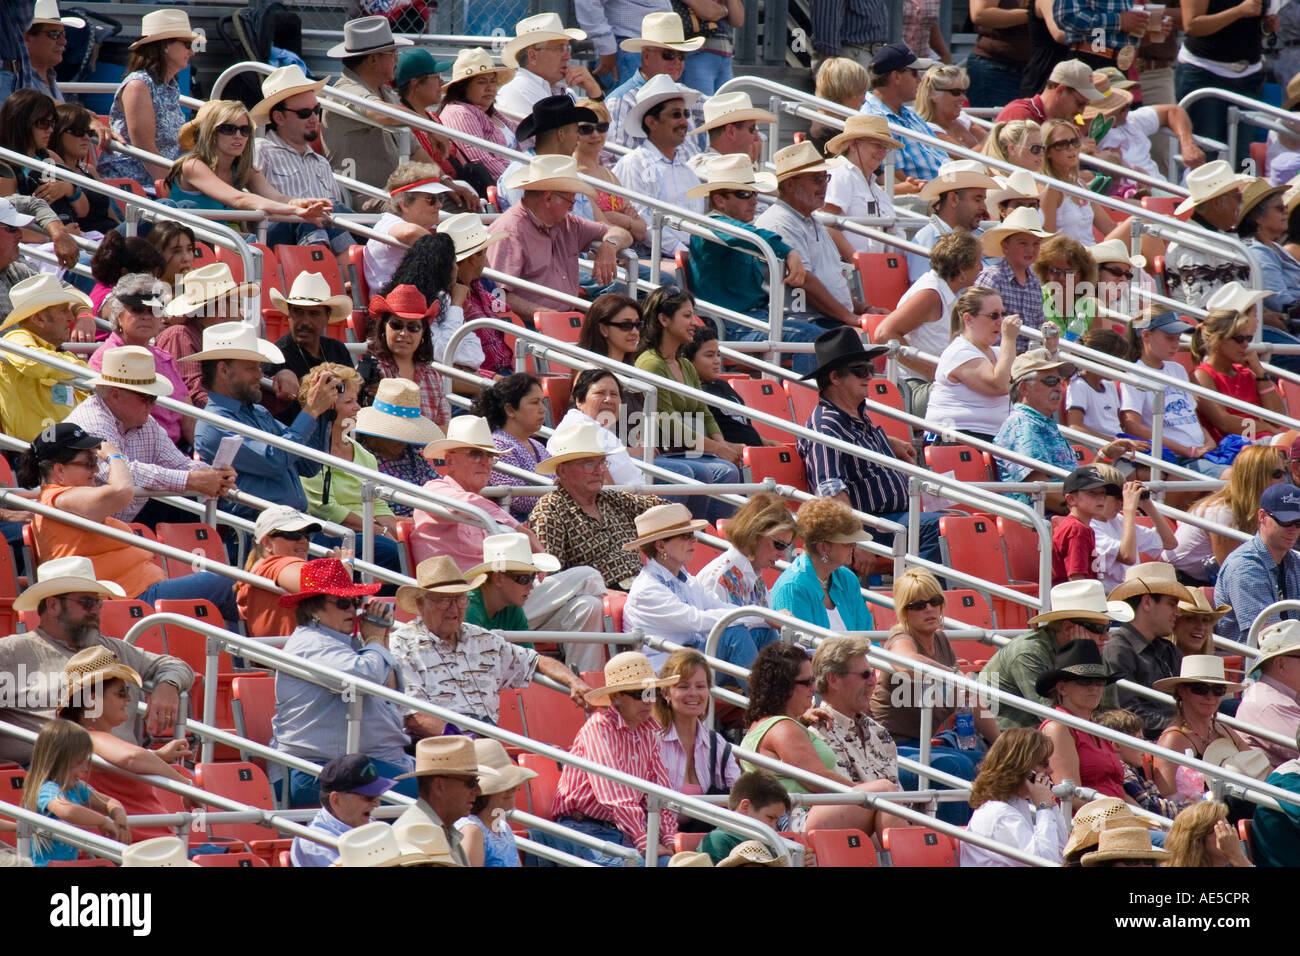 Hispanic and Caucasian crowd wearing cowboy hats watching rodeo from box seats of the stadium stands Stock Photo